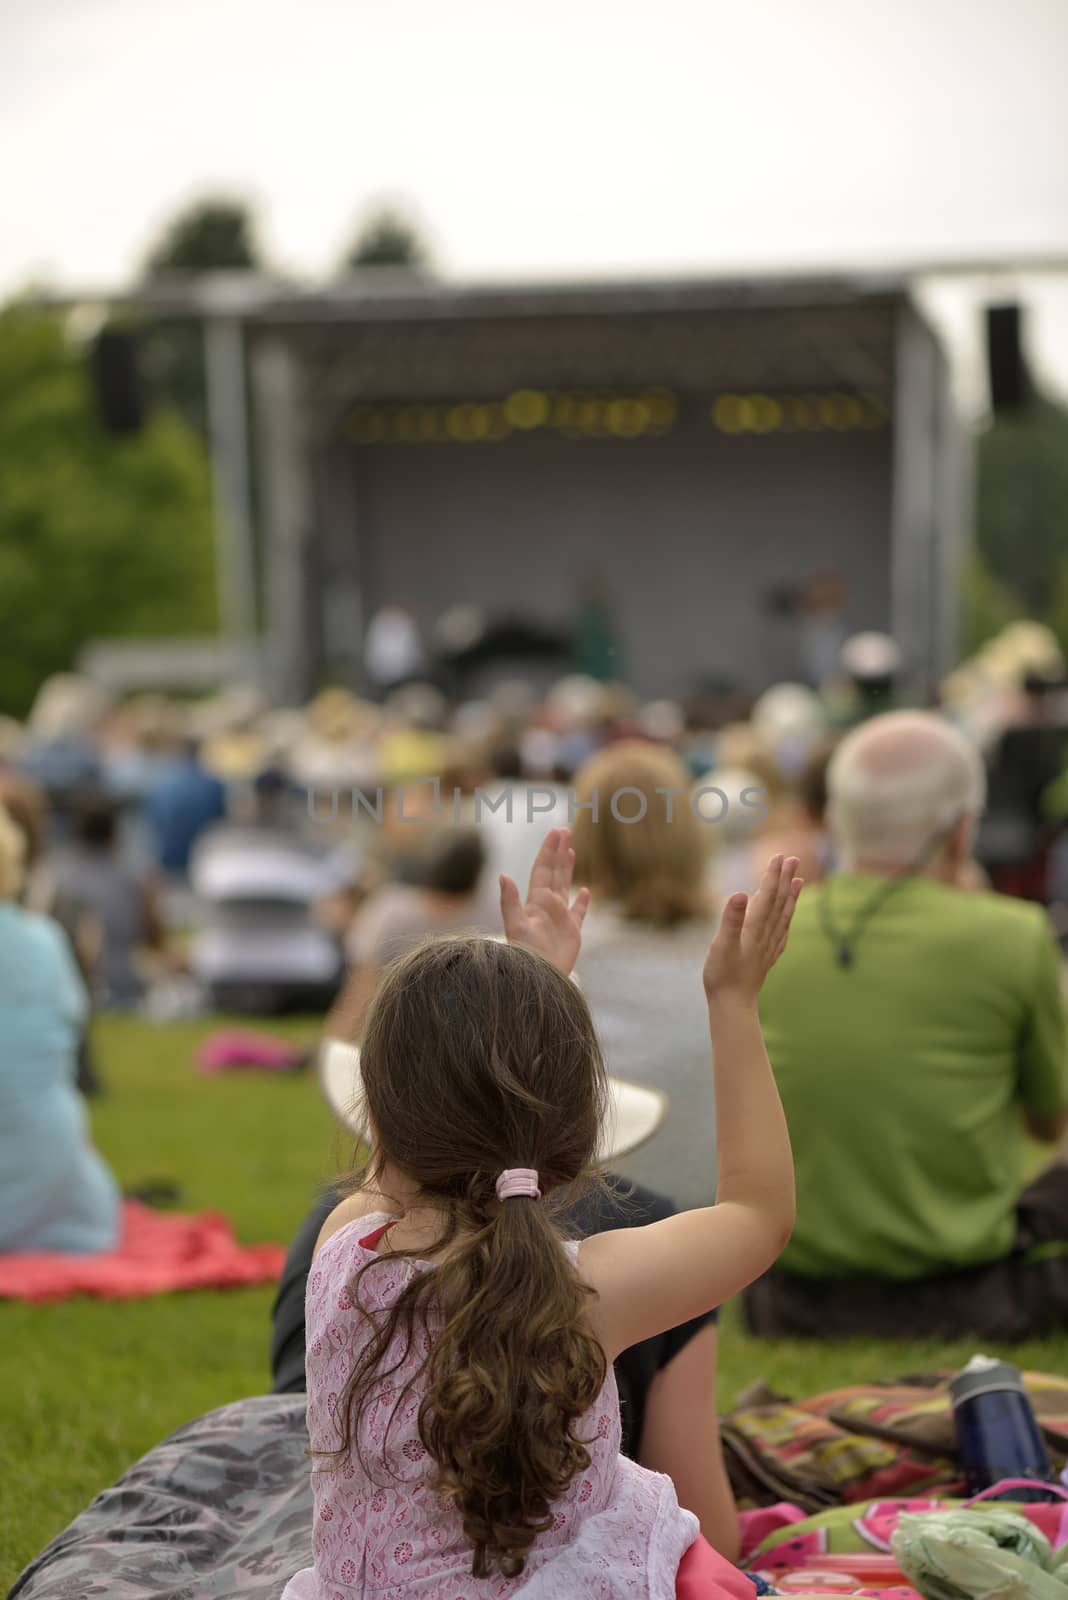 Outdoor free concert on grass in summer